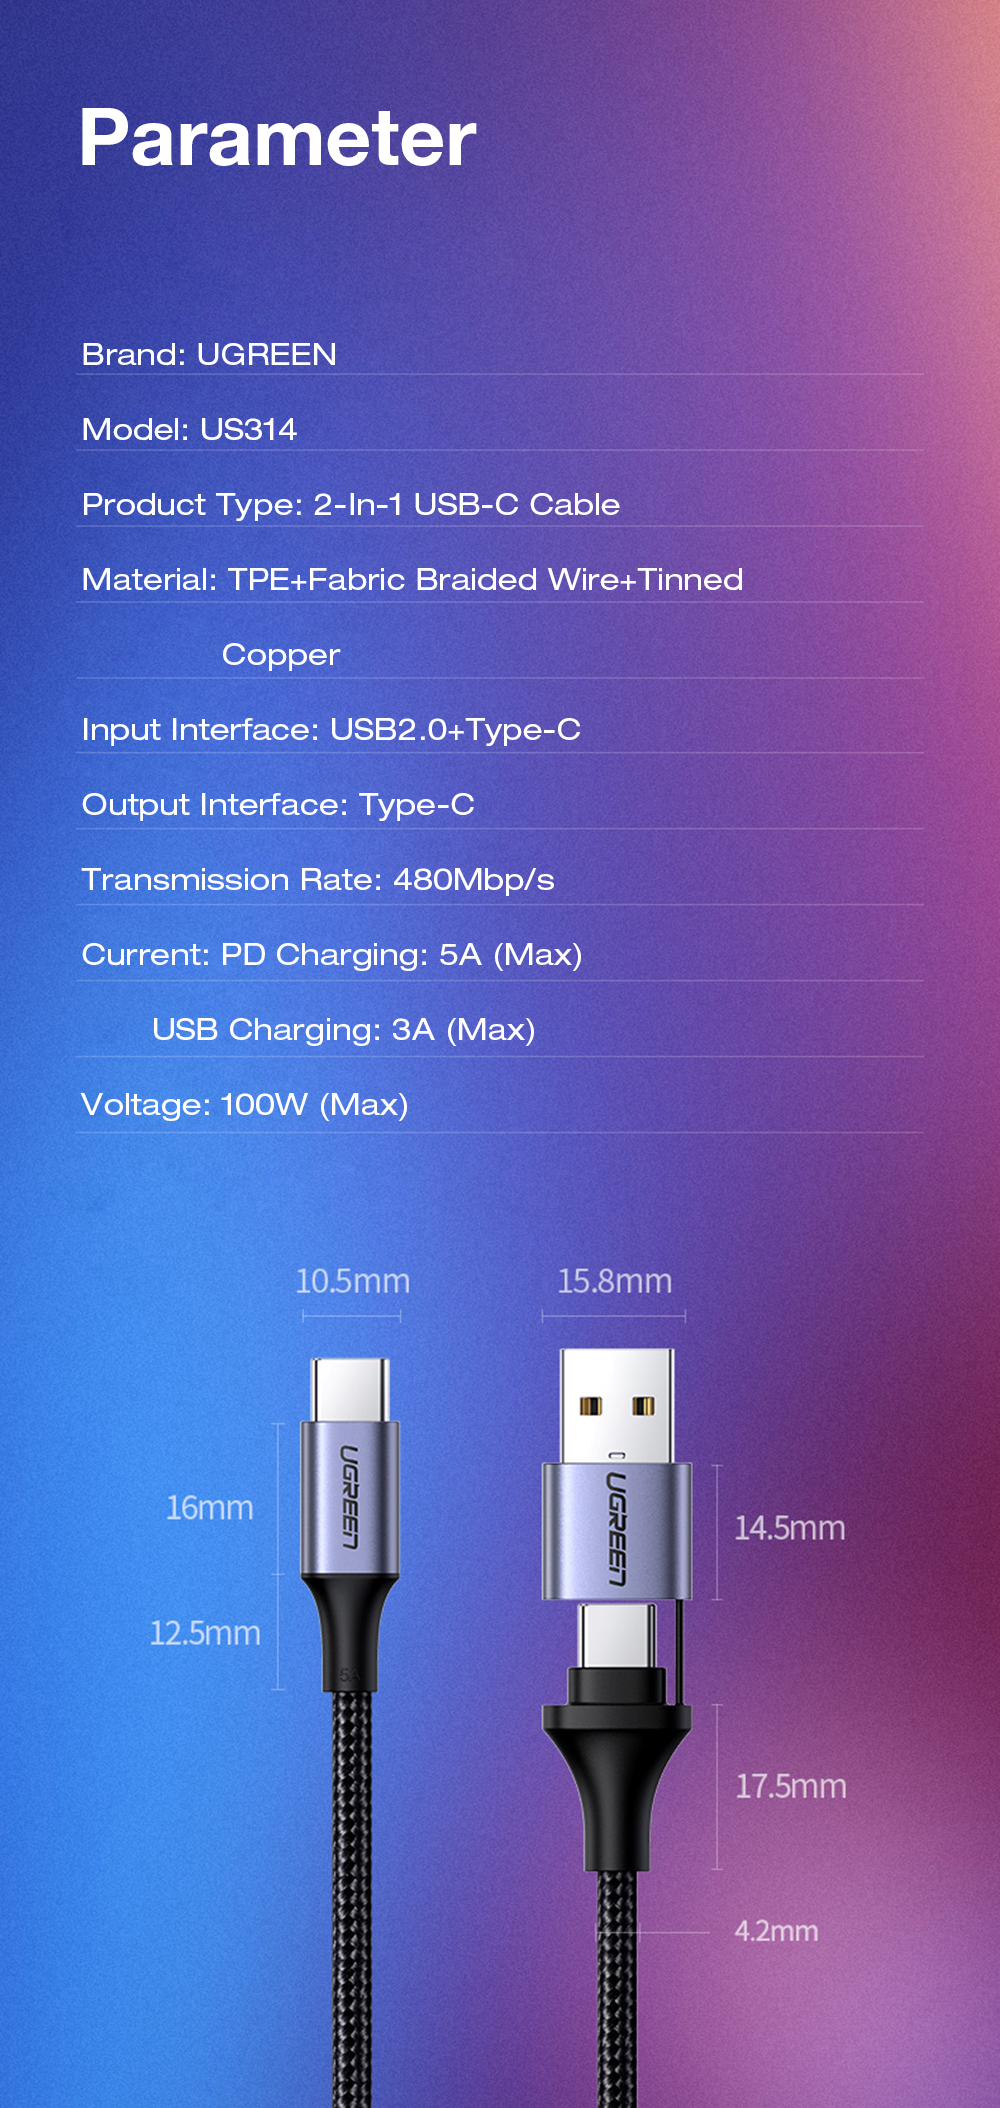 UGREEN-US314-2-In-1-PD-100W-Fast-Charing-Cable-Type-C-to-USB-20--Type-C-Data-Cable-5A-480Mbps-1M-Qui-1930222-14